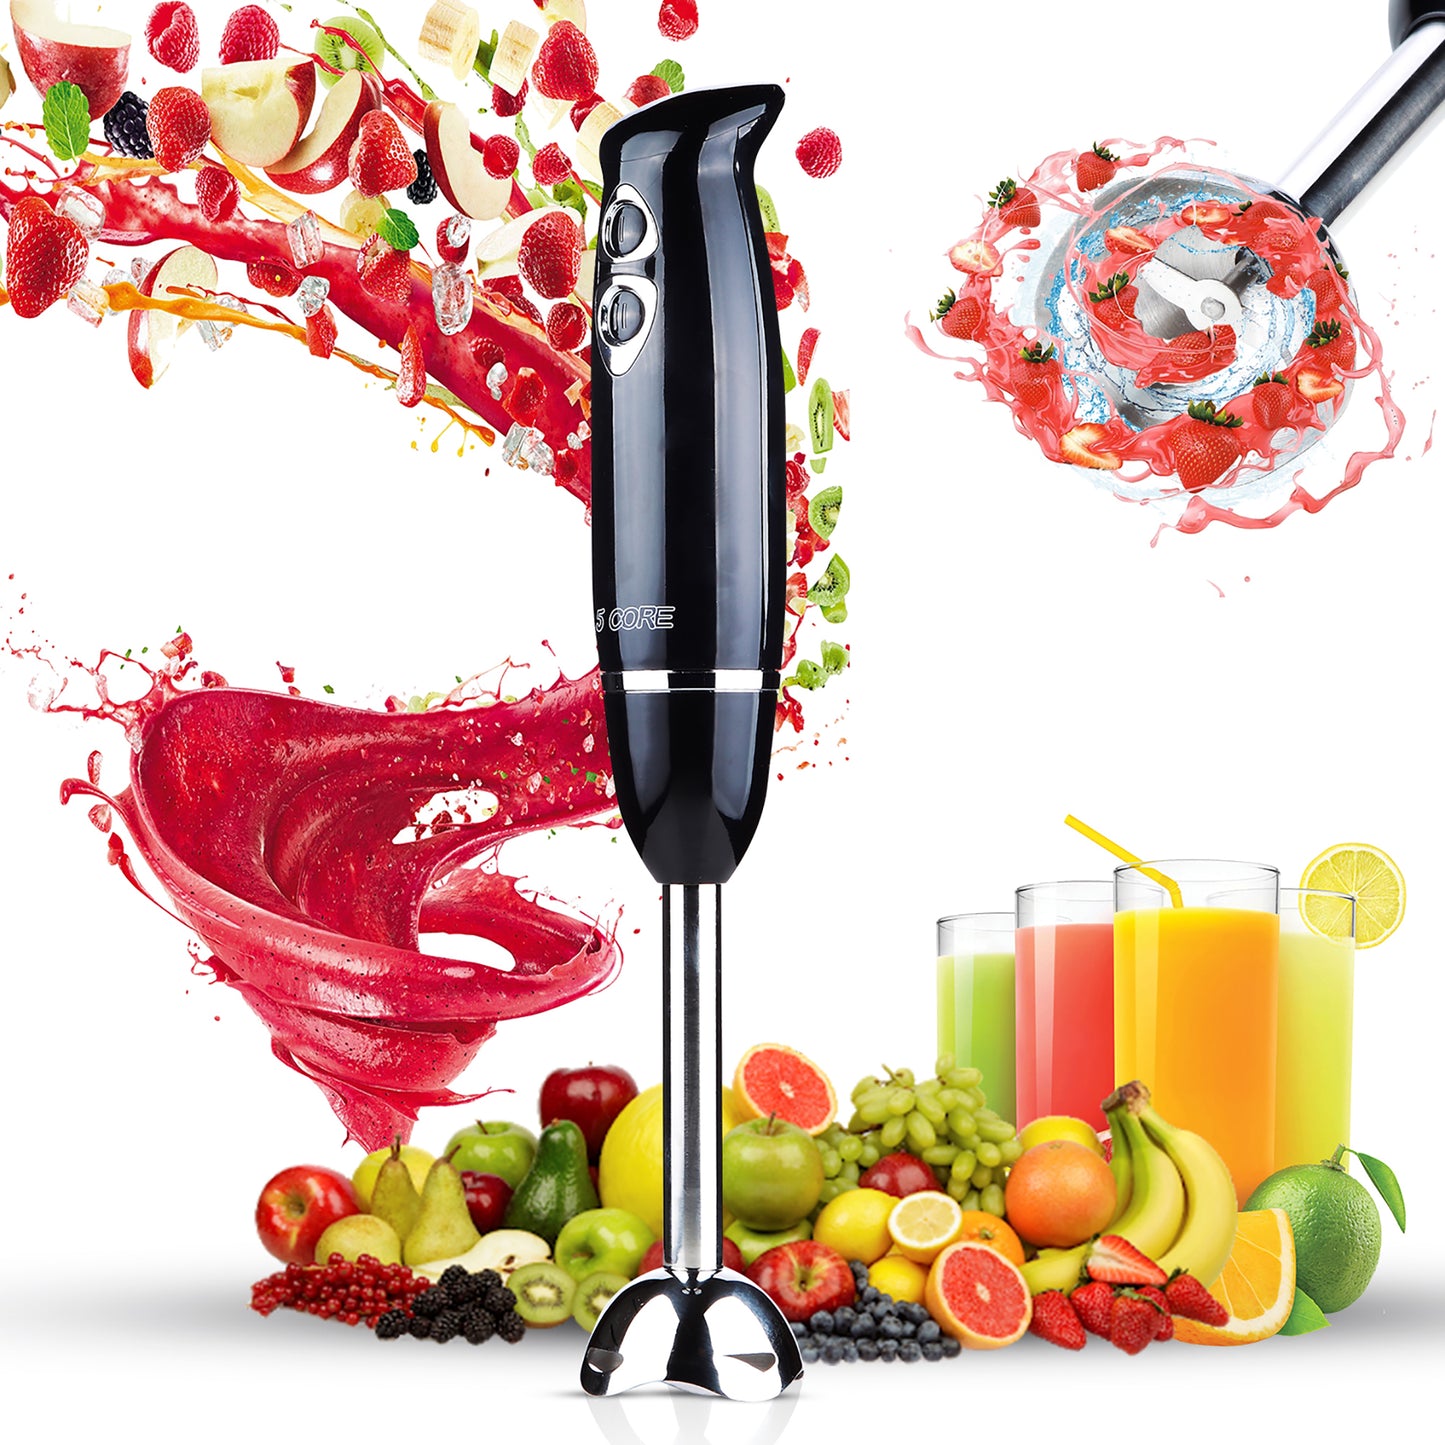 Powerful Immersion Blender Black| 500 Watt Multi-Purpose Hand Blender Heavy Duty Copper Motor w/ Steel Finish | for Soup, Smoothie, Puree, Baby Food, 304 Stainless Steel Blades- HB 1510 BLK